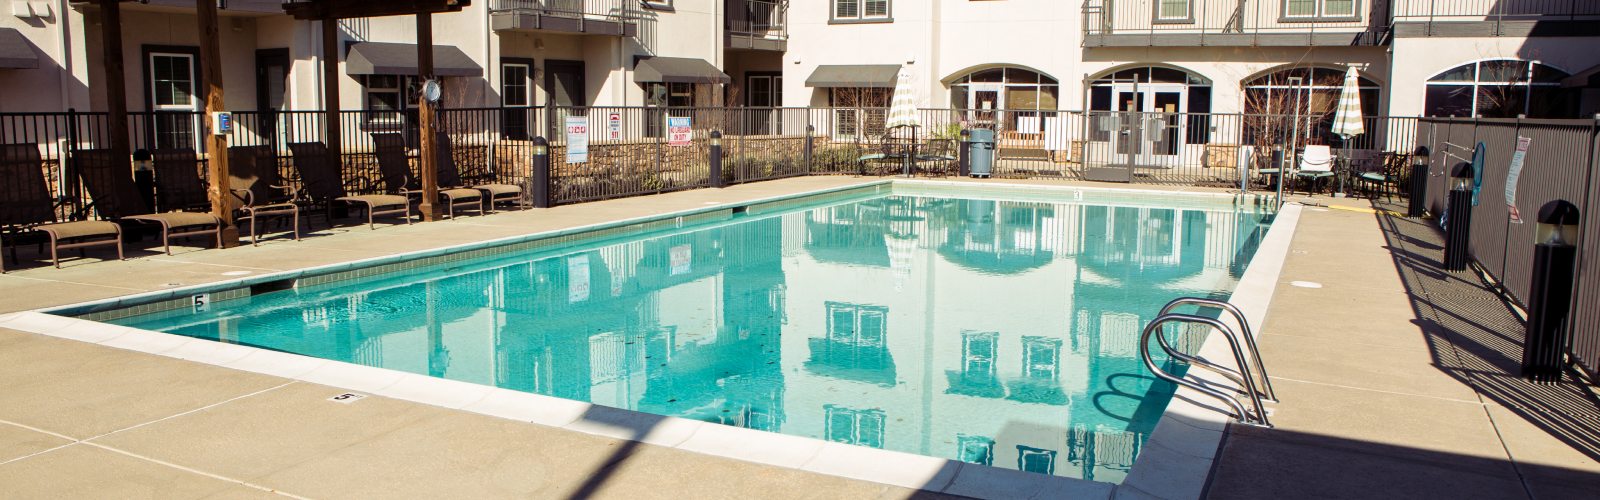 Brentwood assisted living pool